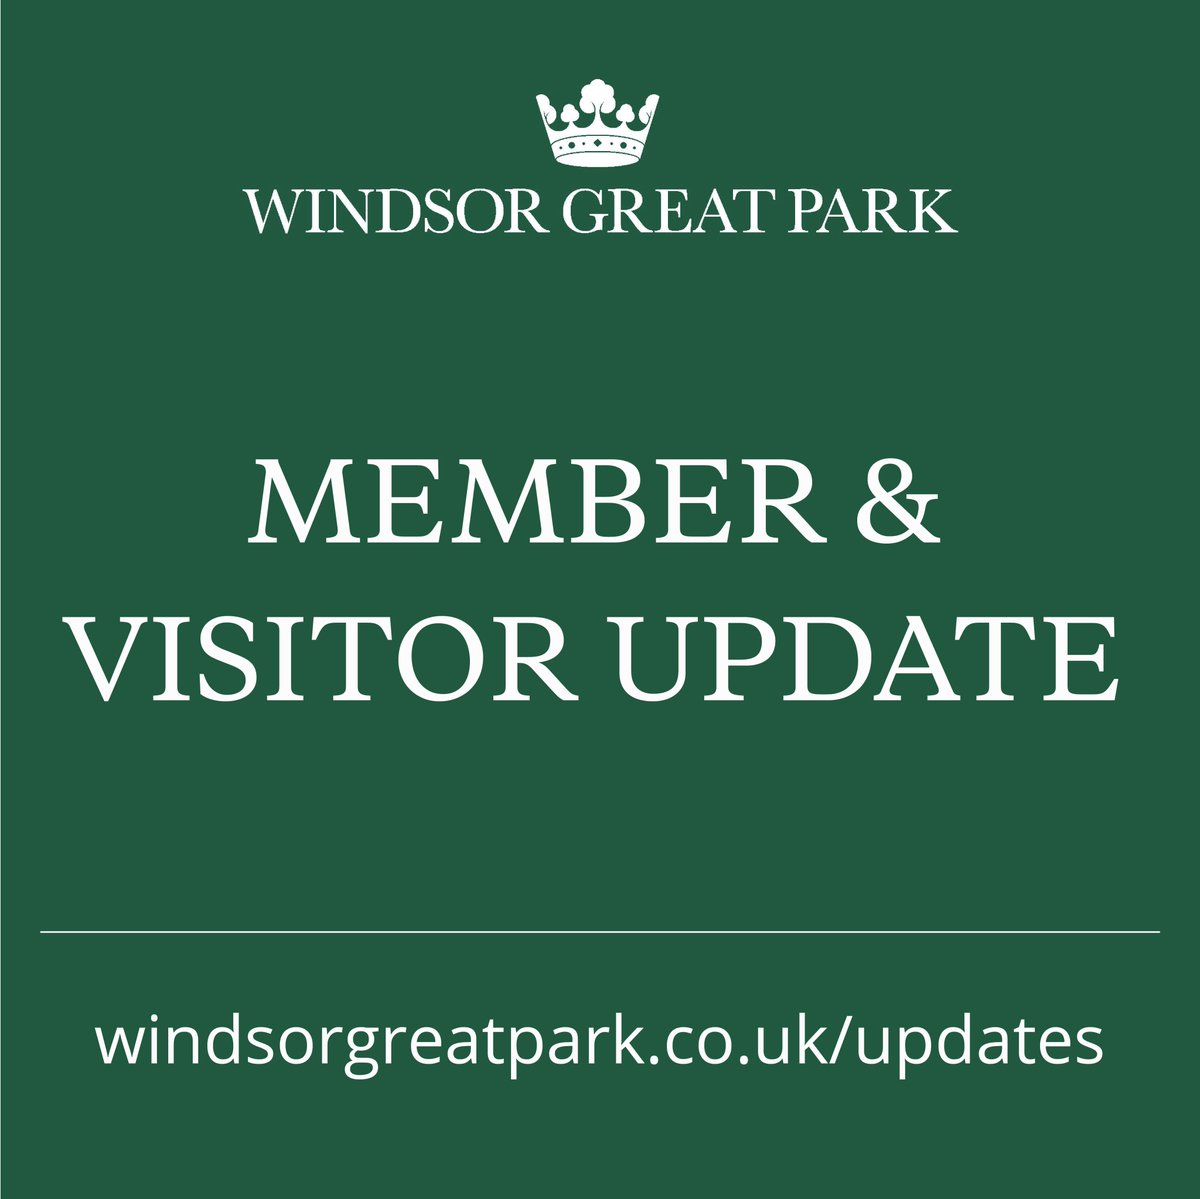 The Met Office has issued a yellow severe weather warning for Monday 15 April. In light of this and following our severe weather procedures, please be aware of closures that will be in place on Monday 15 April that may impact your visit. windsorgreatpark.co.uk/visitorupdates @visitwindsor